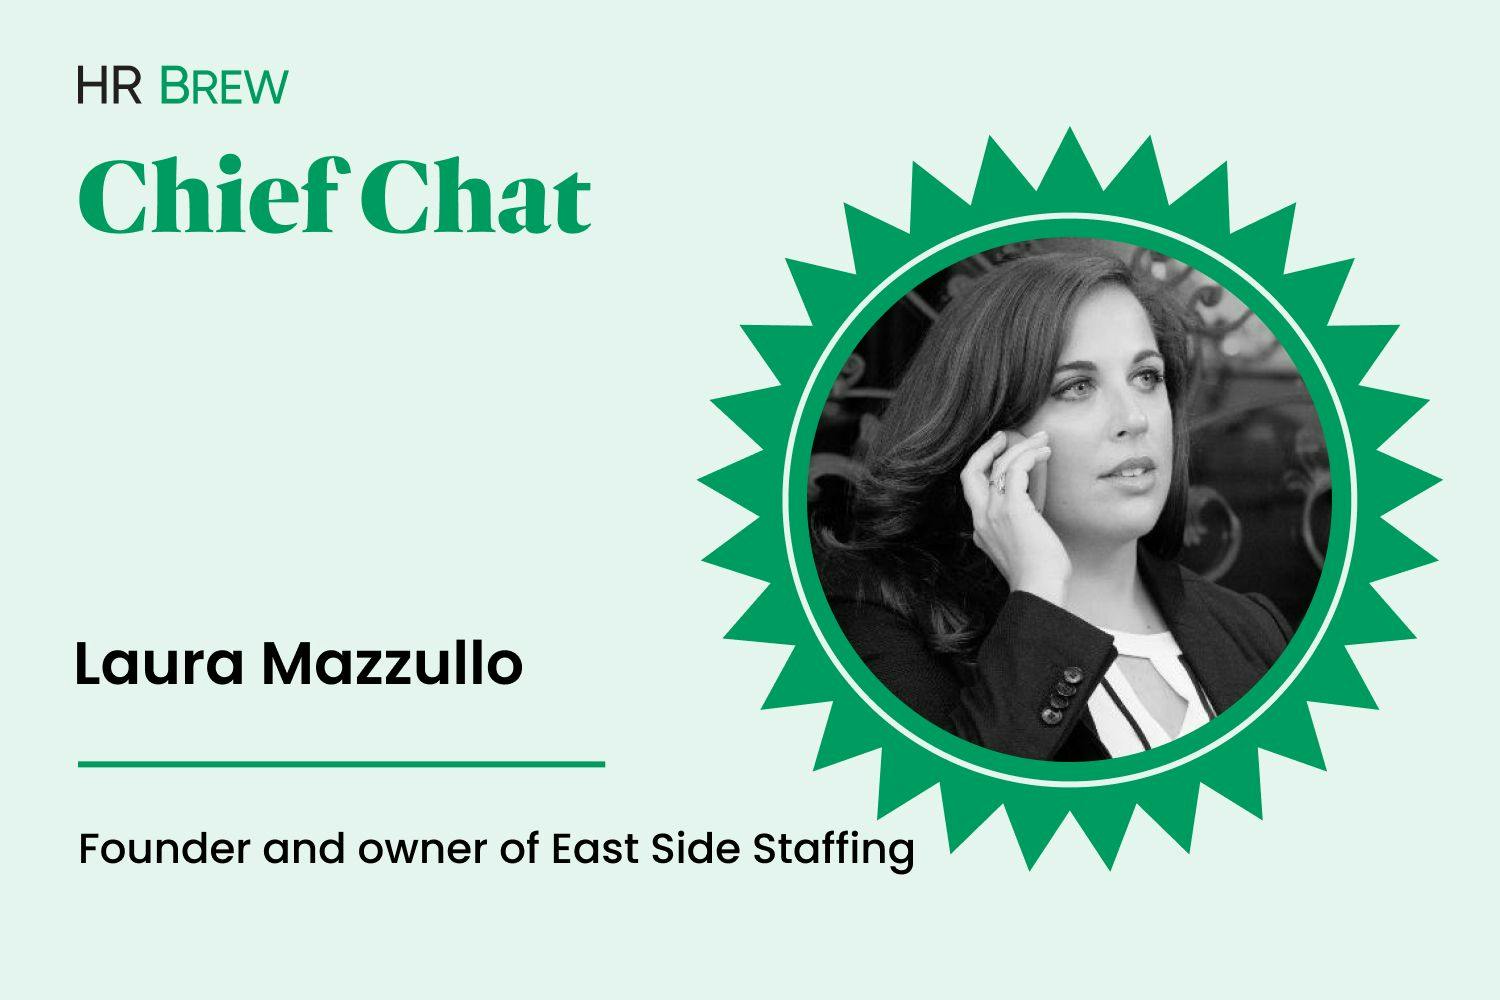 green card that says Chief Chat, Laura Mazullo founder and owner of East Side Staffing next to a circle headshot of black and white image of woman on her cell phone